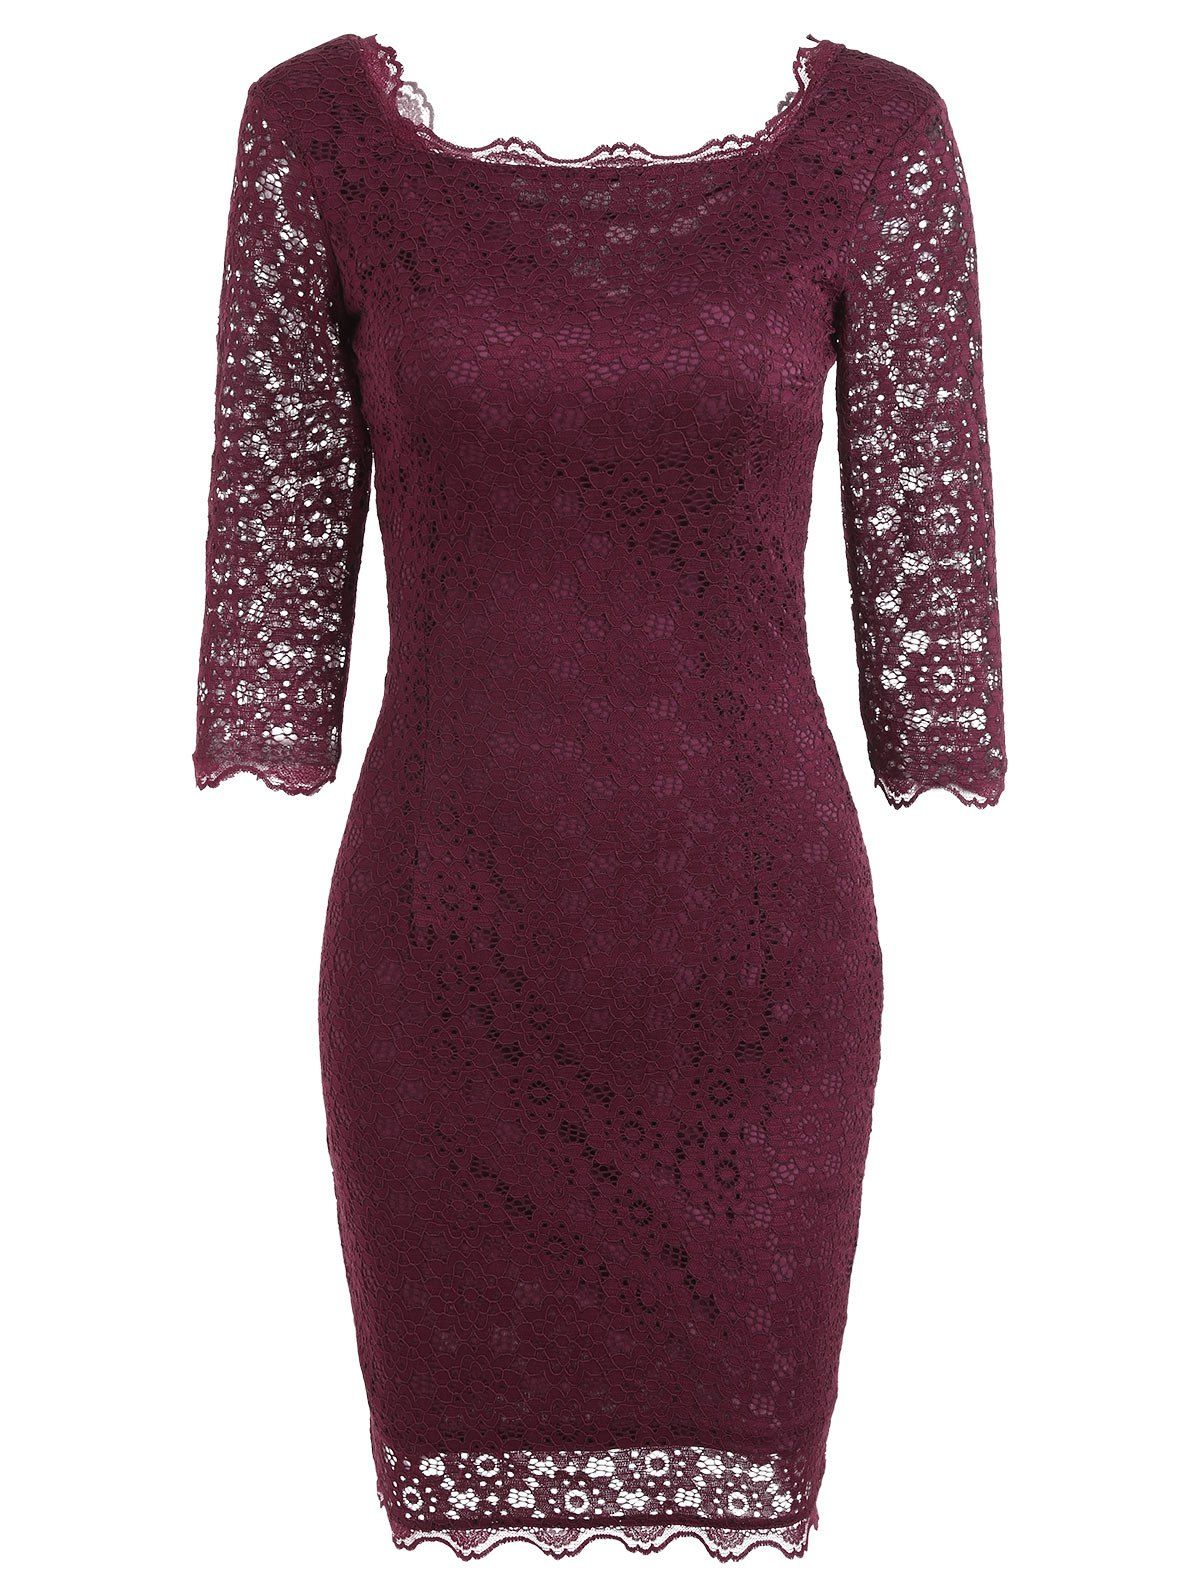 [42% OFF] Cut Out Lace Party Bodycon Dress | Rosegal